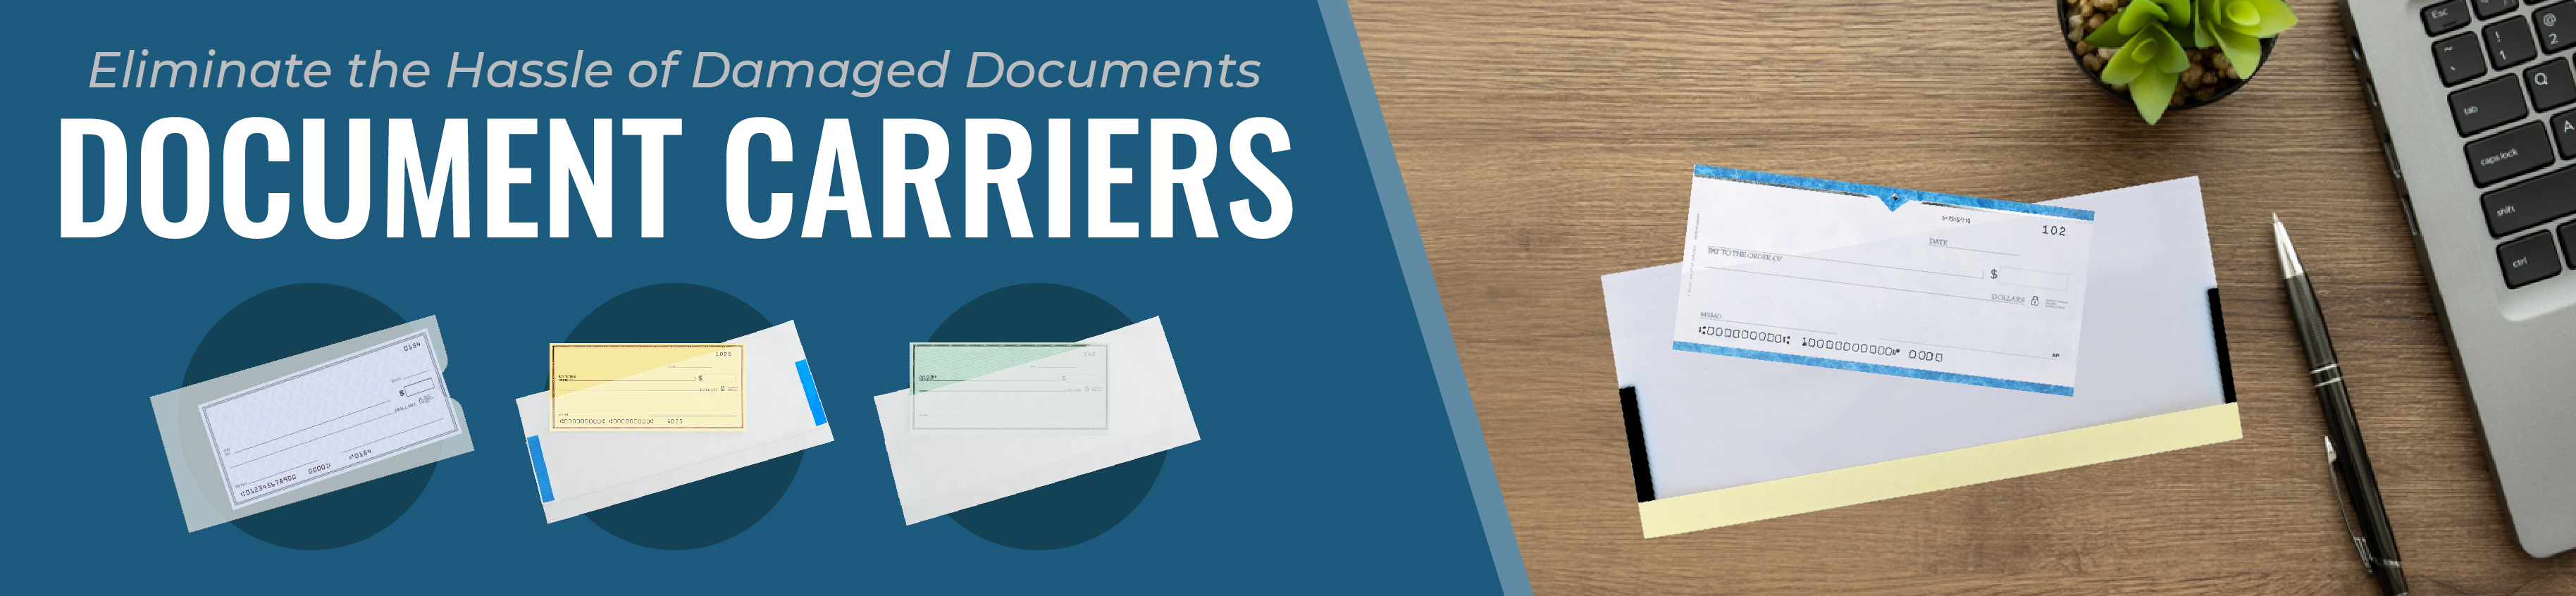 Document Carriers